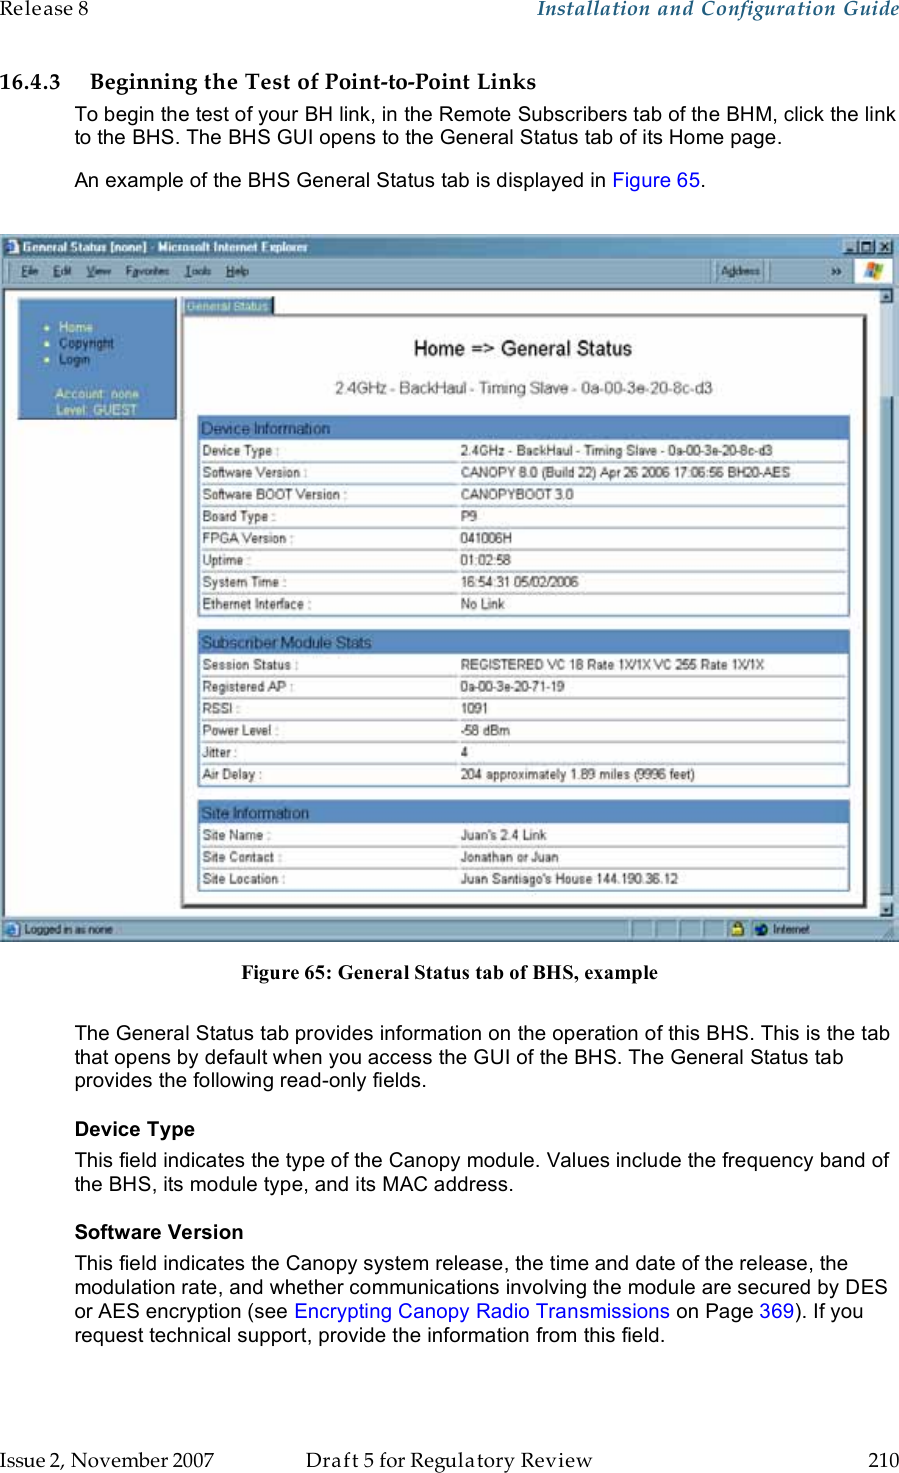 Release 8    Installation and Configuration Guide   Issue 2, November 2007  Draft 5 for Regulatory Review  210     16.4.3 Beginning the Test of Point-to-Point Links To begin the test of your BH link, in the Remote Subscribers tab of the BHM, click the link to the BHS. The BHS GUI opens to the General Status tab of its Home page. An example of the BHS General Status tab is displayed in Figure 65.   Figure 65: General Status tab of BHS, example  The General Status tab provides information on the operation of this BHS. This is the tab that opens by default when you access the GUI of the BHS. The General Status tab provides the following read-only fields. Device Type  This field indicates the type of the Canopy module. Values include the frequency band of the BHS, its module type, and its MAC address. Software Version This field indicates the Canopy system release, the time and date of the release, the modulation rate, and whether communications involving the module are secured by DES or AES encryption (see Encrypting Canopy Radio Transmissions on Page 369). If you request technical support, provide the information from this field. 